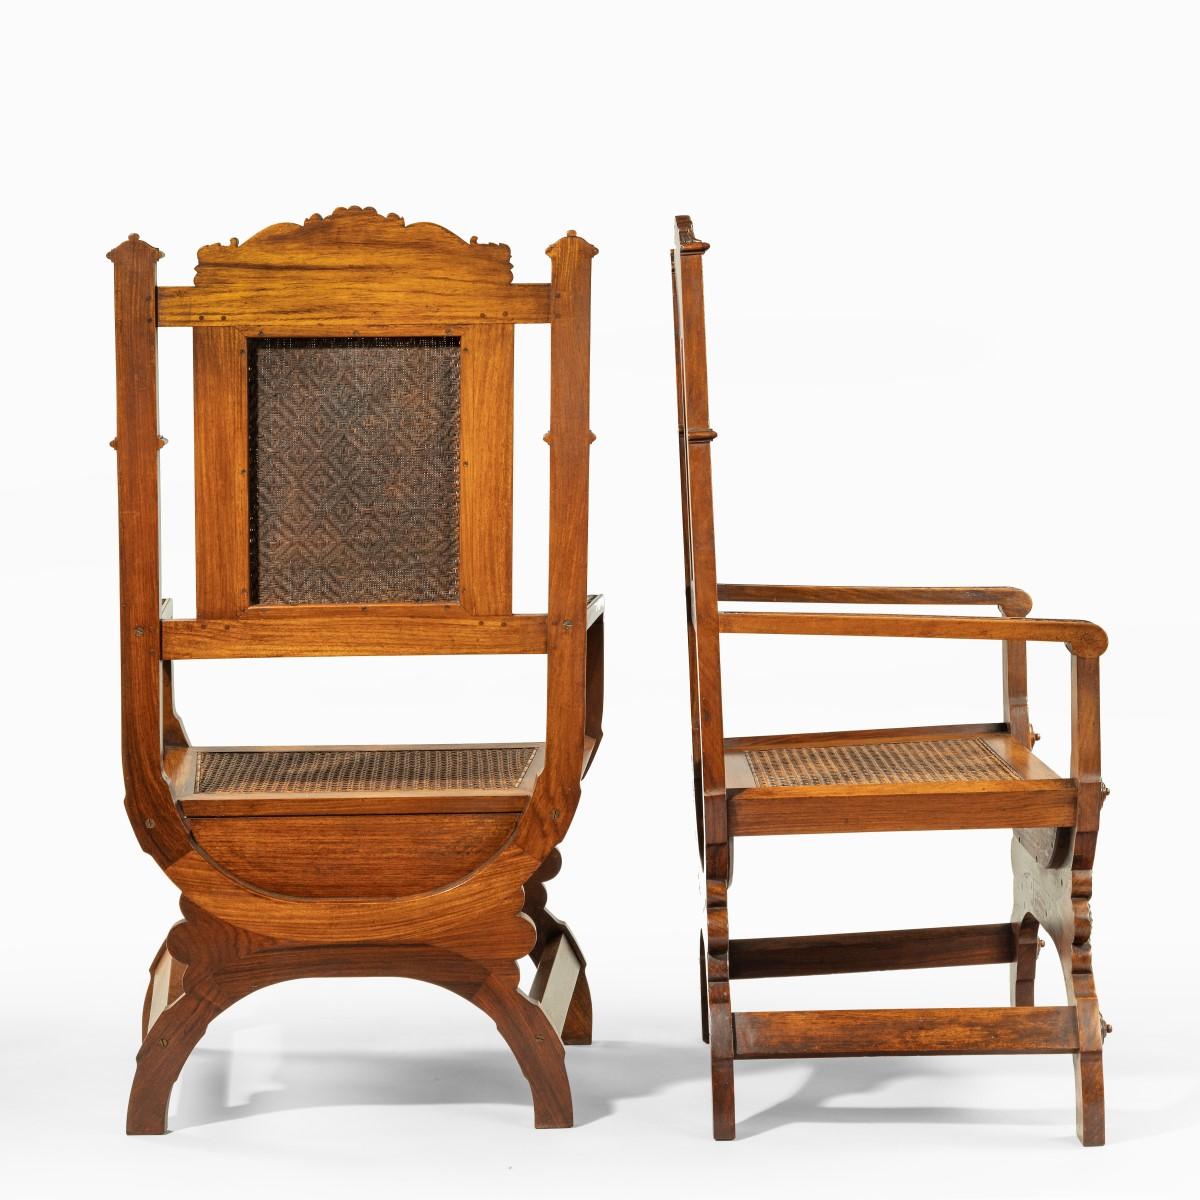 Pair of Indian Throne Chairs, Carved with the Arms of the Kingdom of Travancor 6